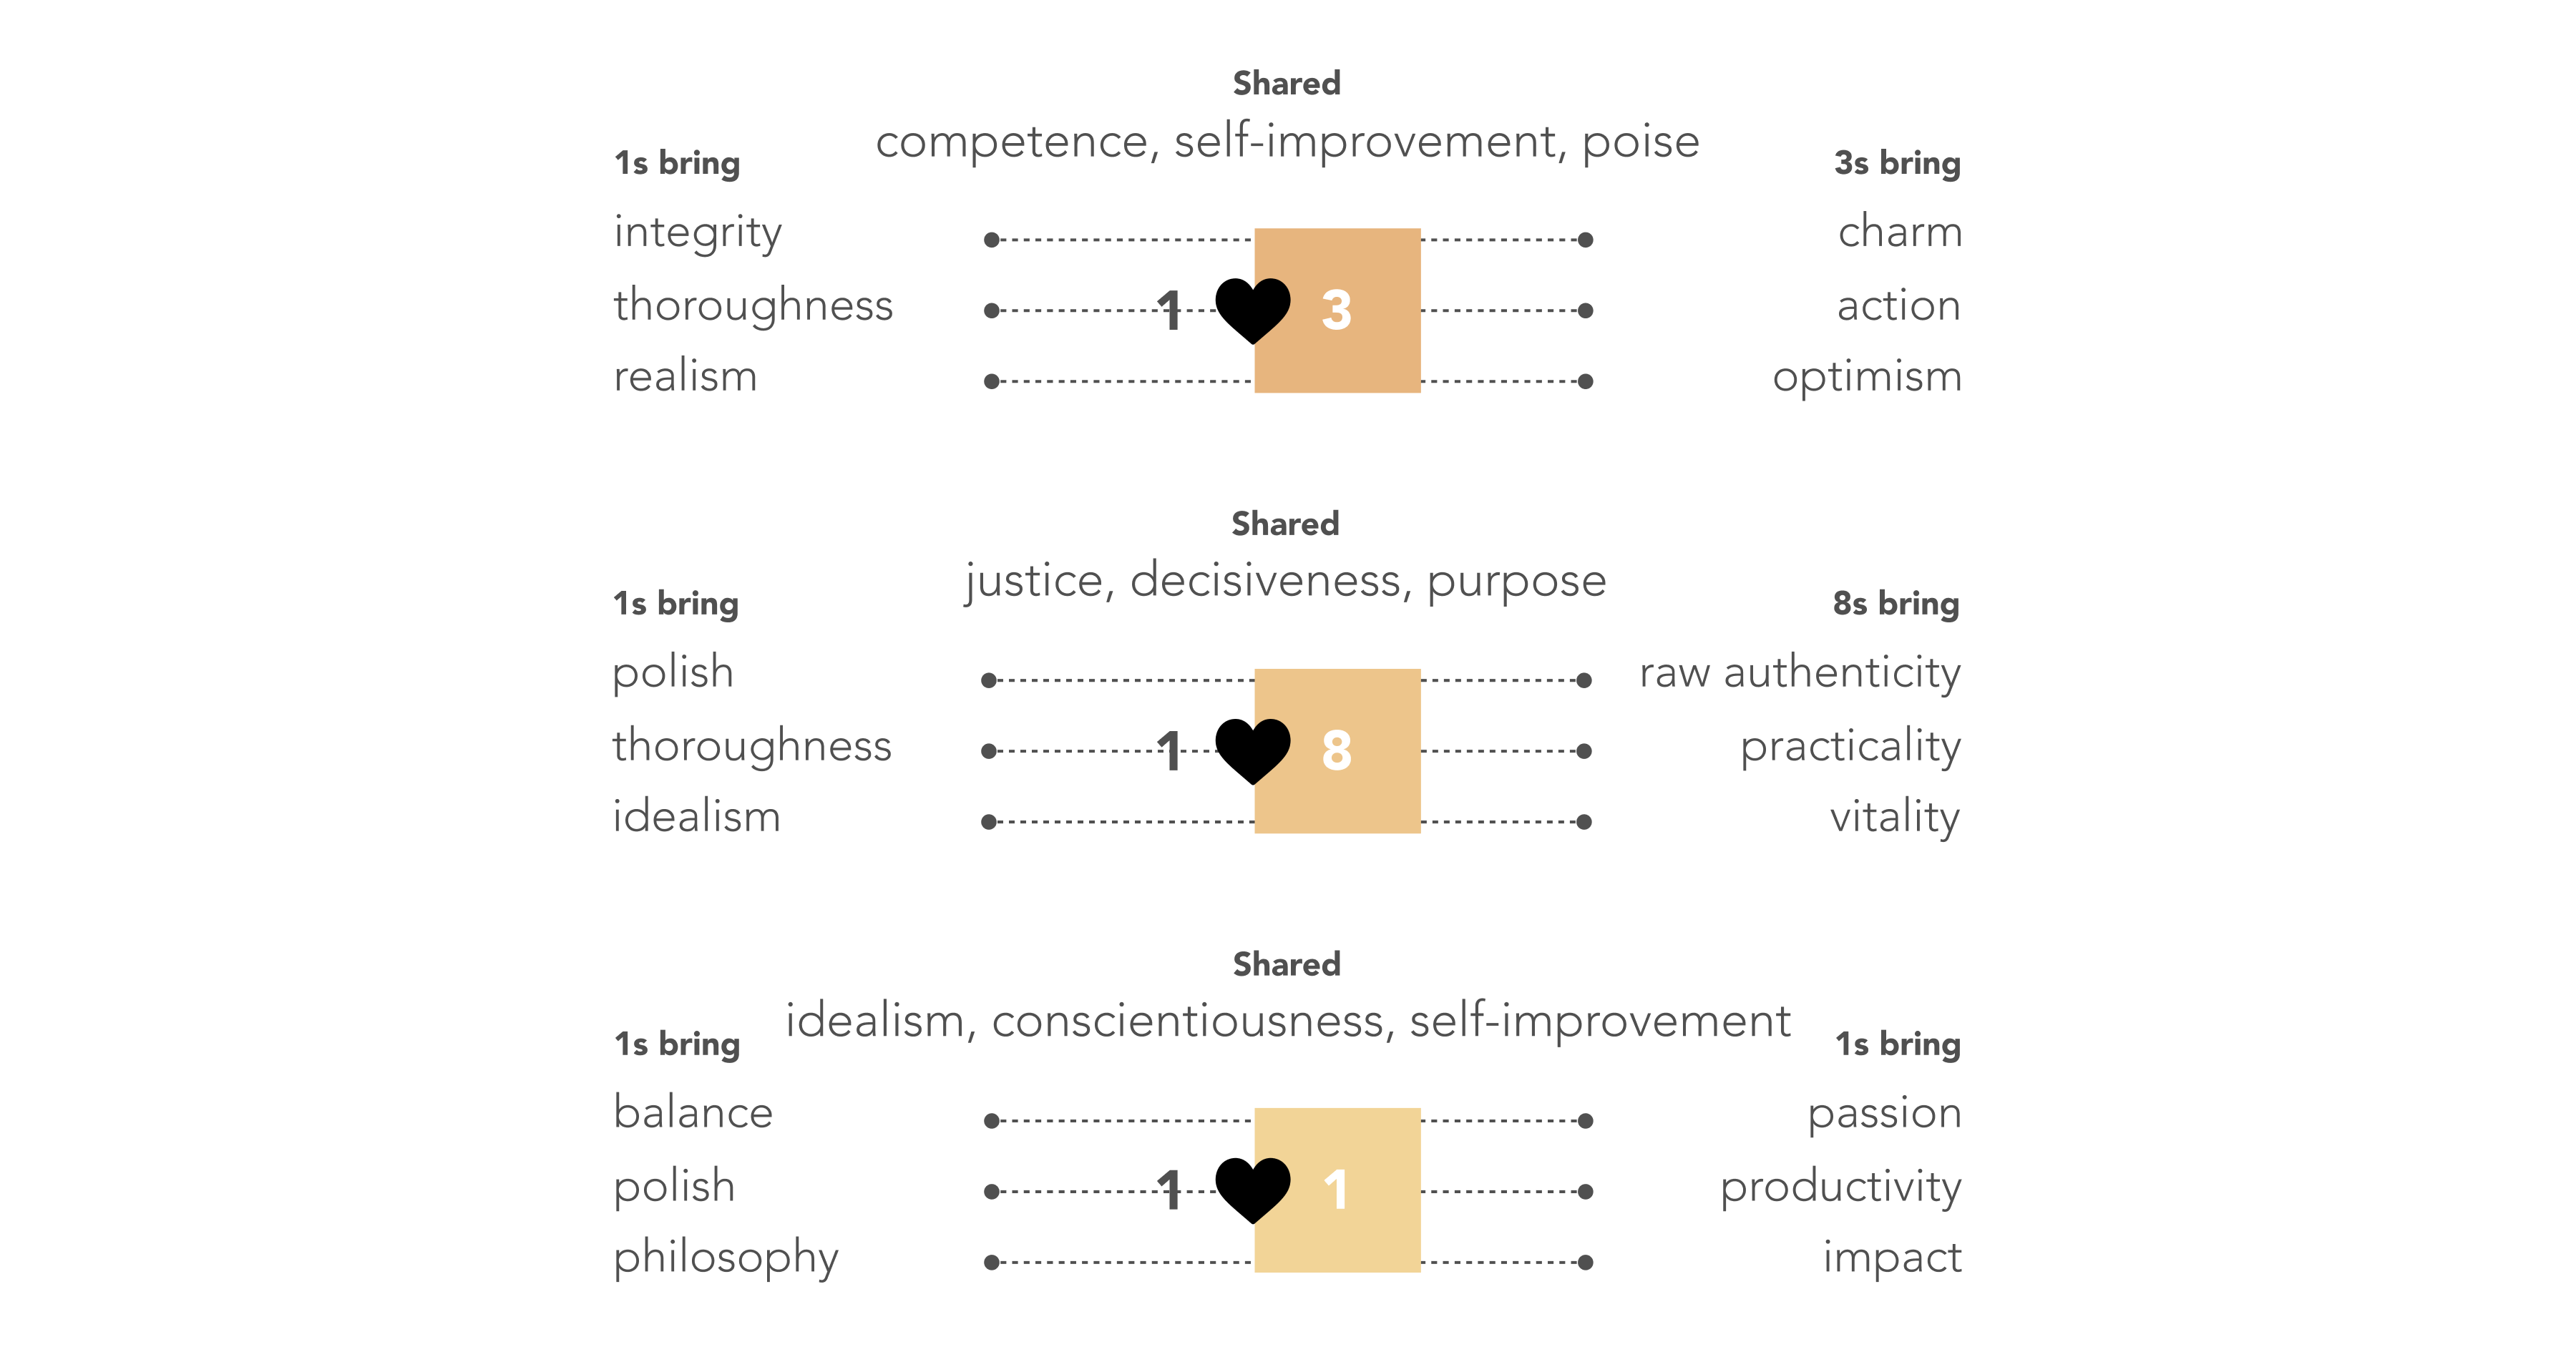 1s and 3s share competence, self-improvement, poise. 1s bring integrity, thoroughness, realism, while 3s bring charm, action, optimism. 1s and 8s share justice, decisiveness, purpose. 1s bring polish, thoroughness, idealism, while 8s bring raw authenticity, practicality, vitality. 1s and 1s share idealism, conscientiousness, self-improvement. 1s bring balance, polish, philosophy, while other 1s bring passion, productivity, impact.